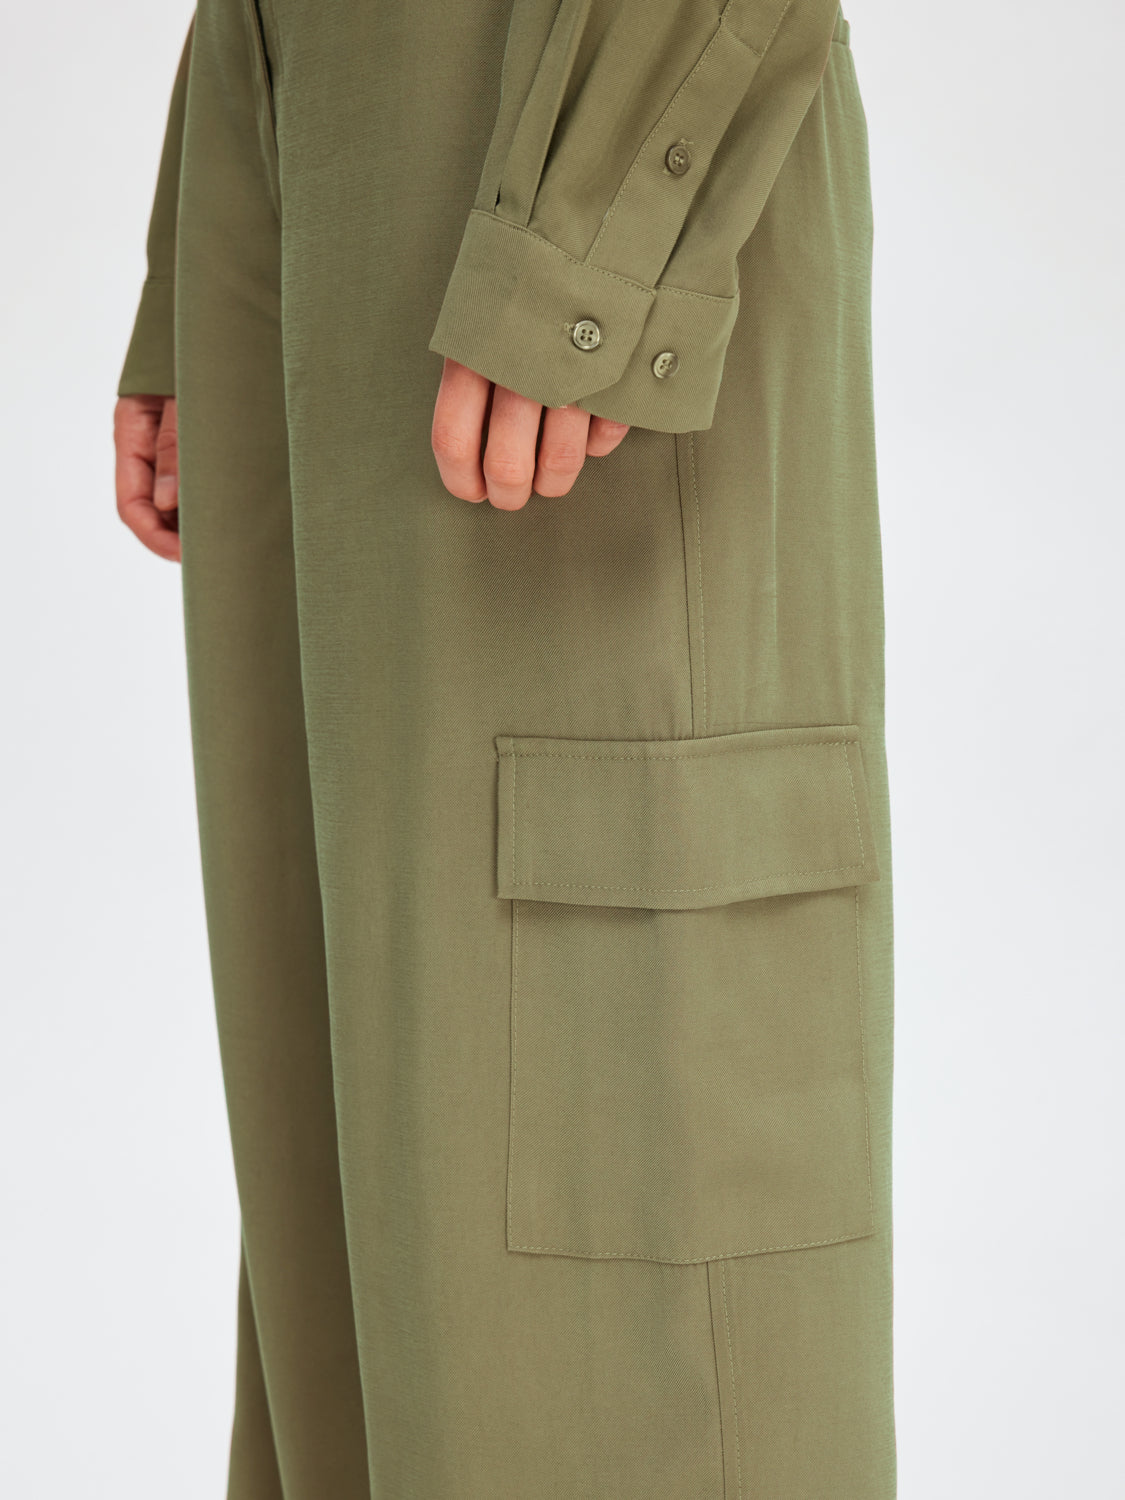 SELECTED FEMME - EMBERLY Pants - Dusky Green